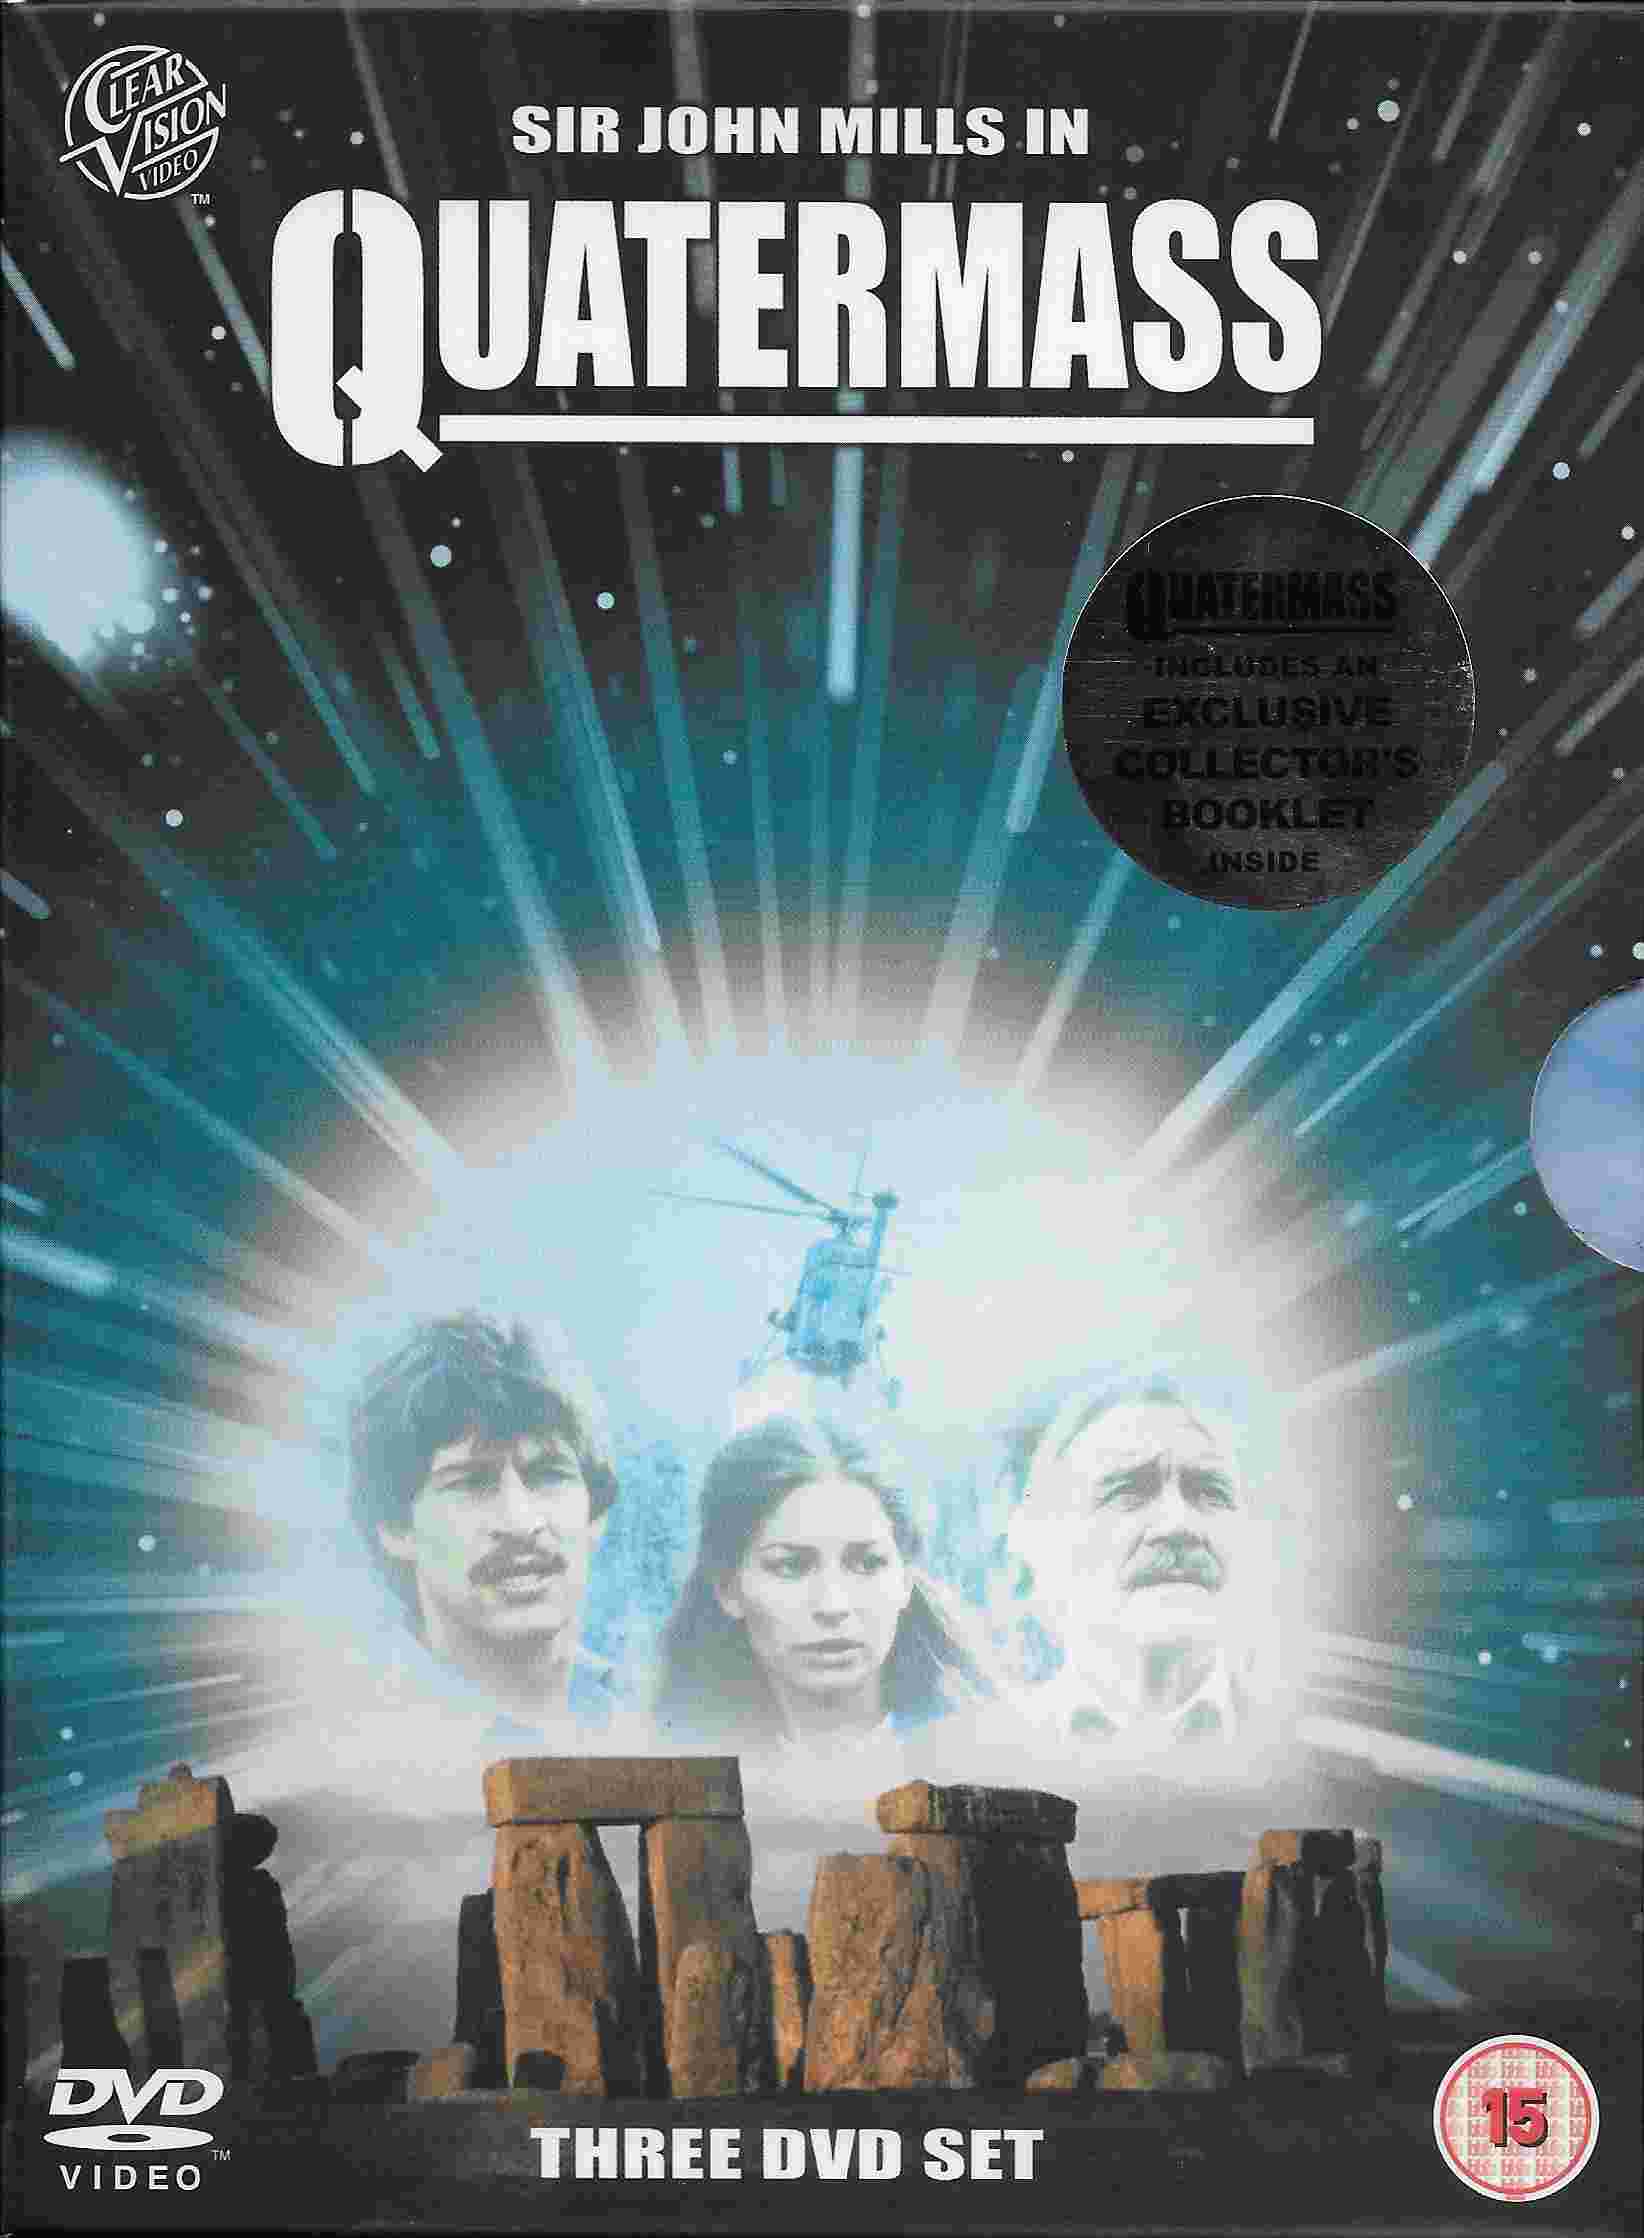 Picture of QBOXDVD 01 Quatermass - Boxed set by artist Nigel Kneale from ITV, Channel 4 and Channel 5 dvds library